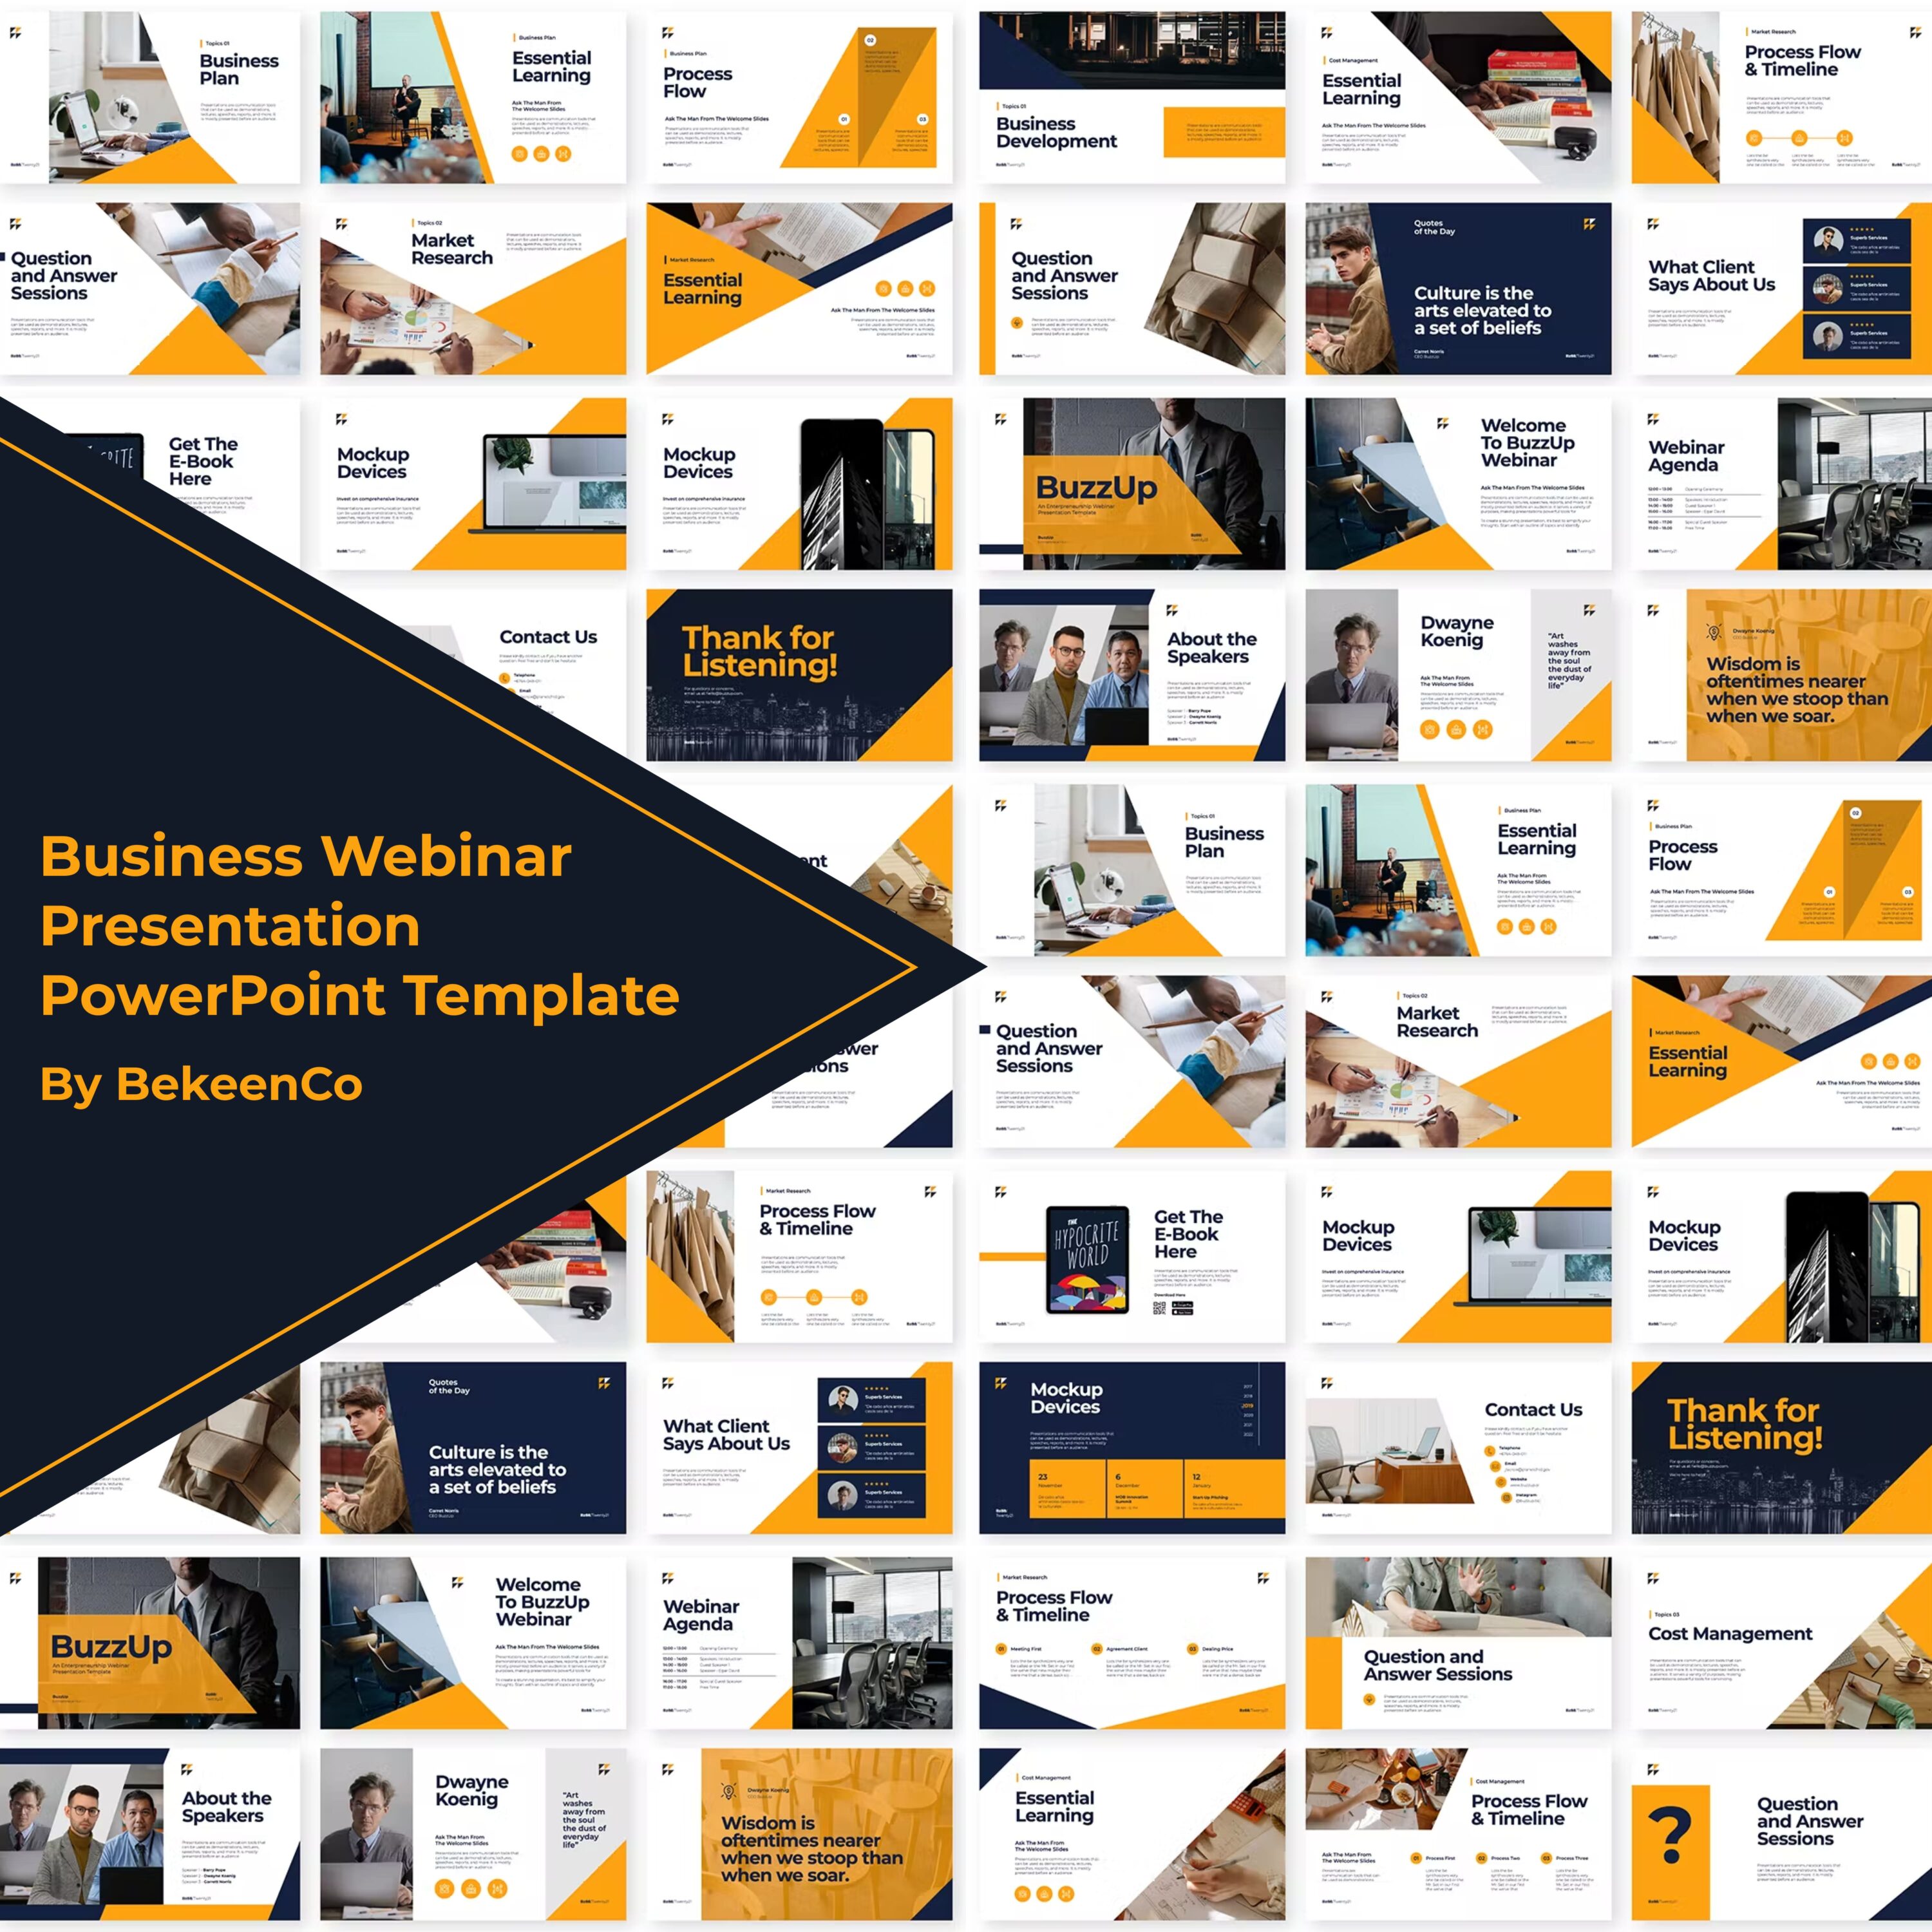 Business Webinar Presentation PowerPoint Template - main image preview.